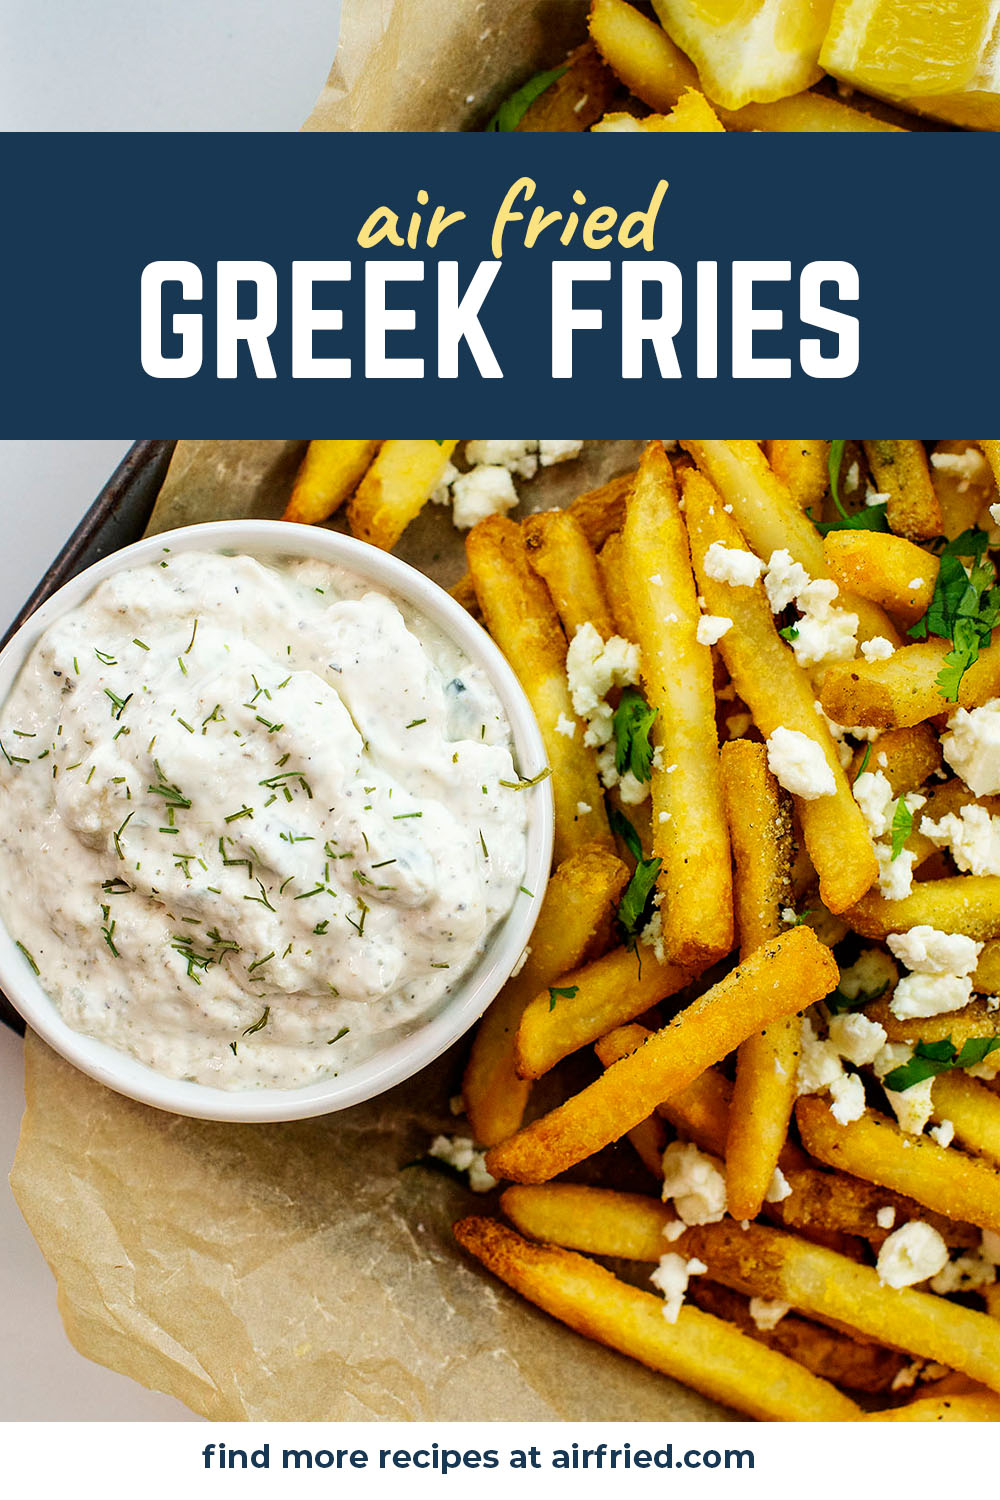 Greek seasoning and Feta cheese pair perfectly with French fries in this recipe!  Make your own Greek fries at home in your air fryer!